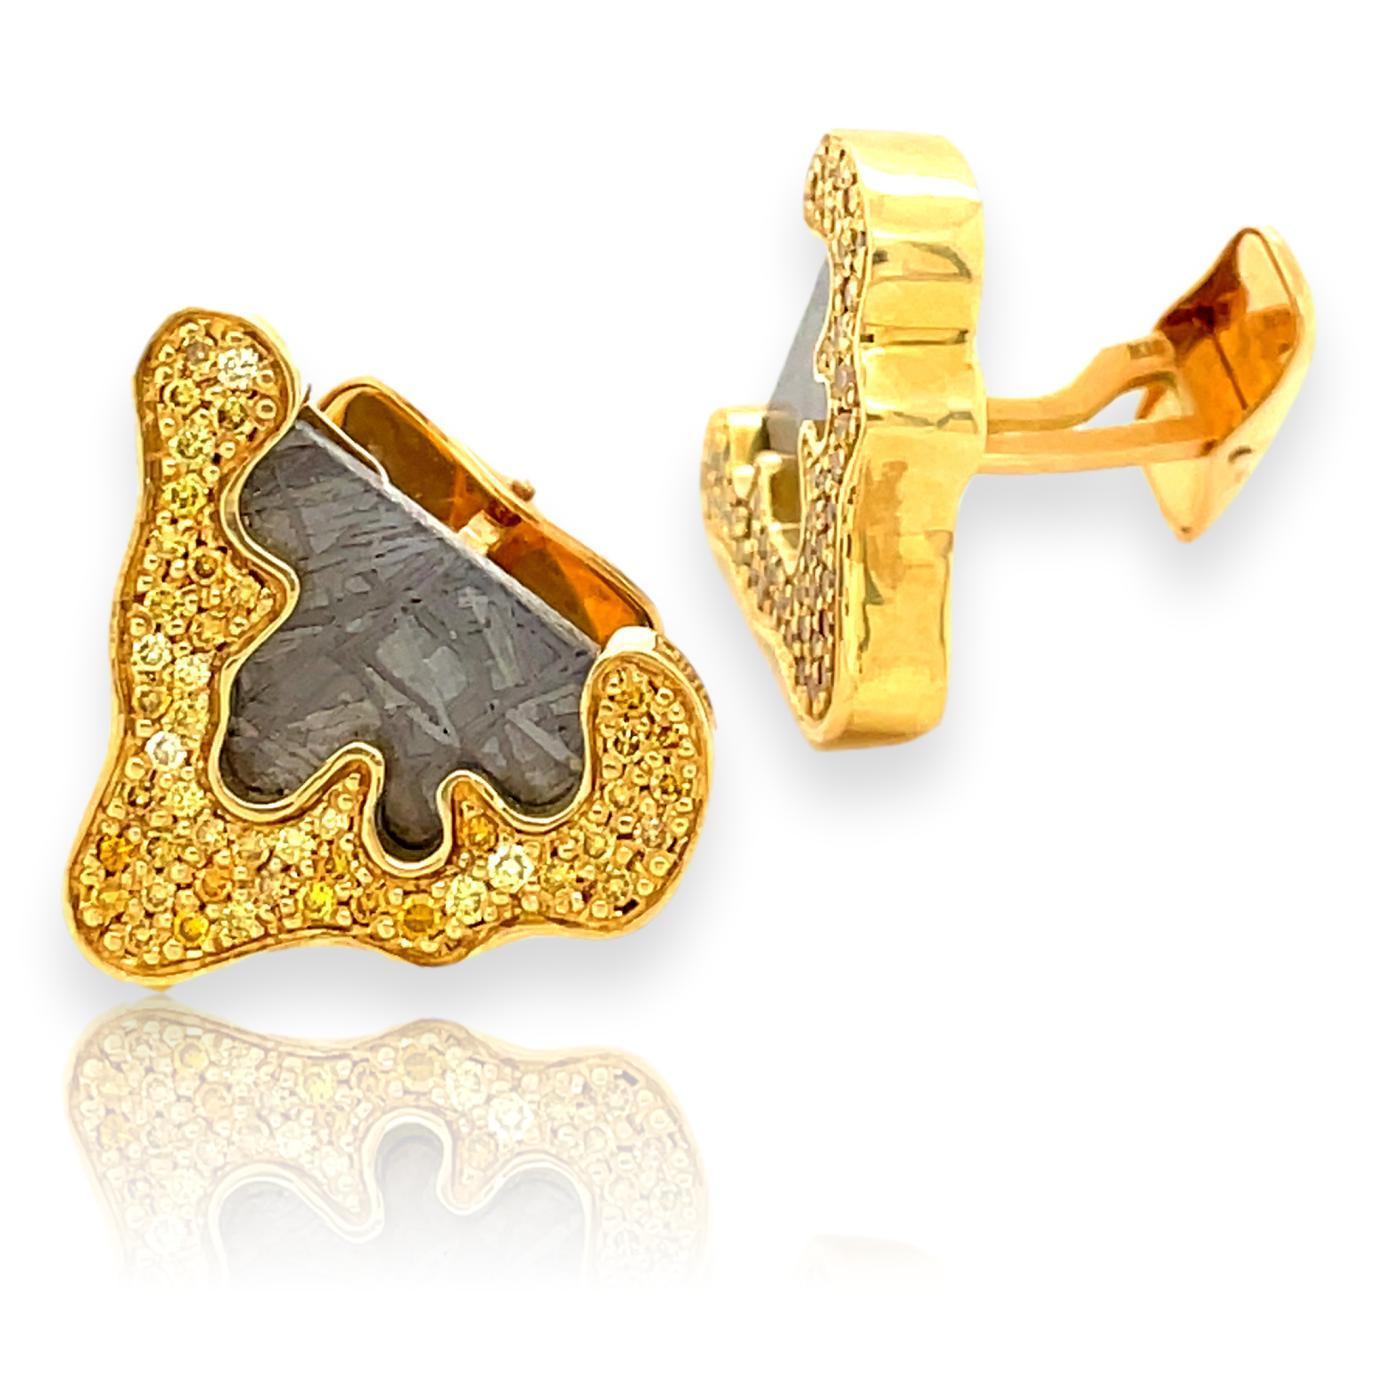 Pair of Gold and Yellow Diamond cufflinks with Gibeon Meteorite.  A pair of 7/8